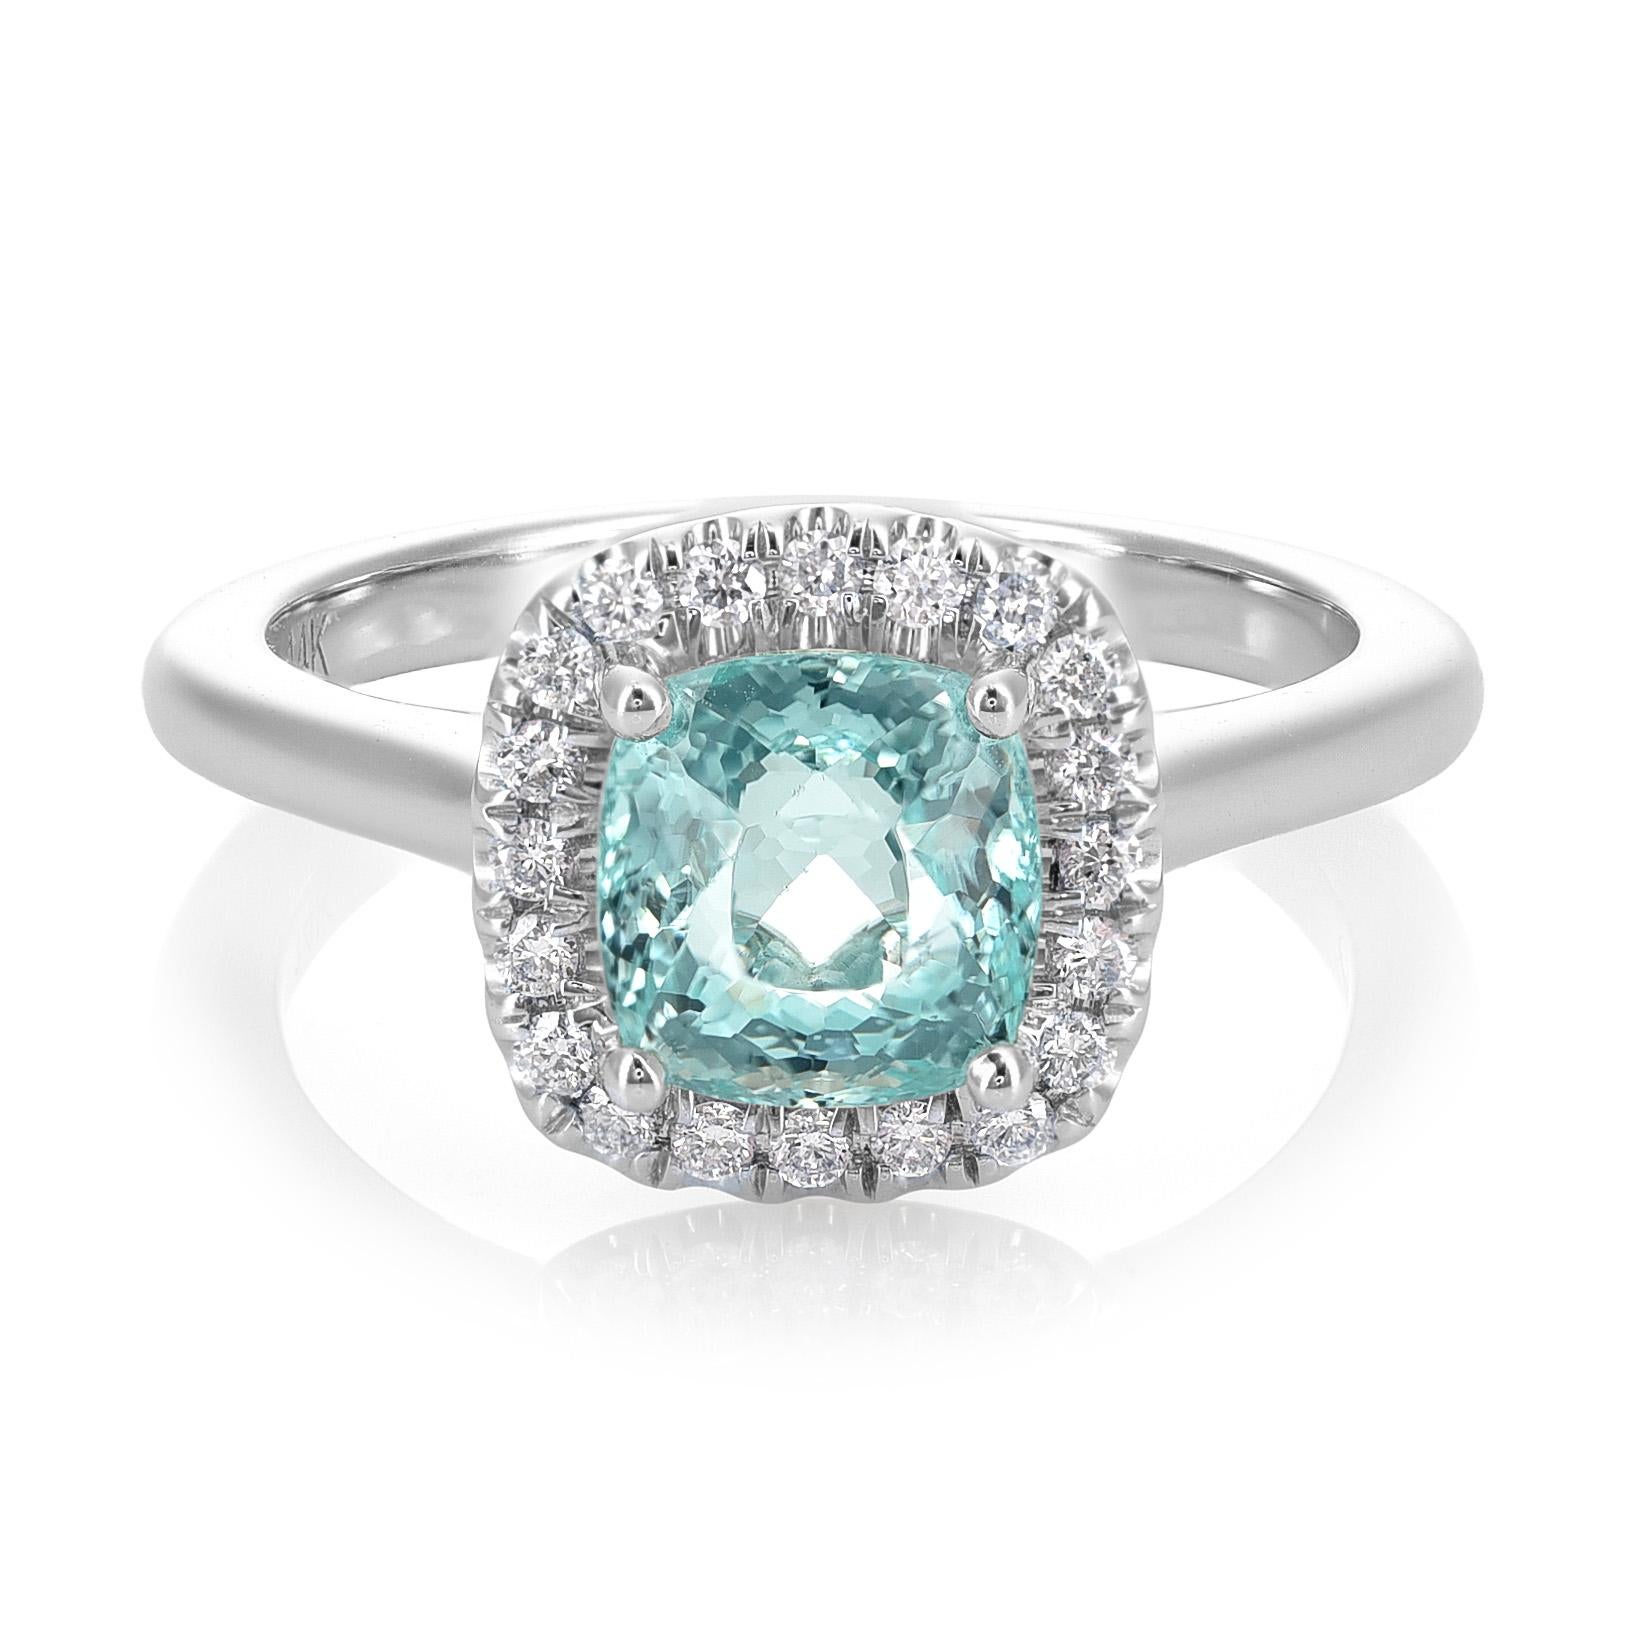 1.90 Carats Paraiba Tourmaline Diamonds set in 14K White Gold Ring In New Condition For Sale In Los Angeles, CA